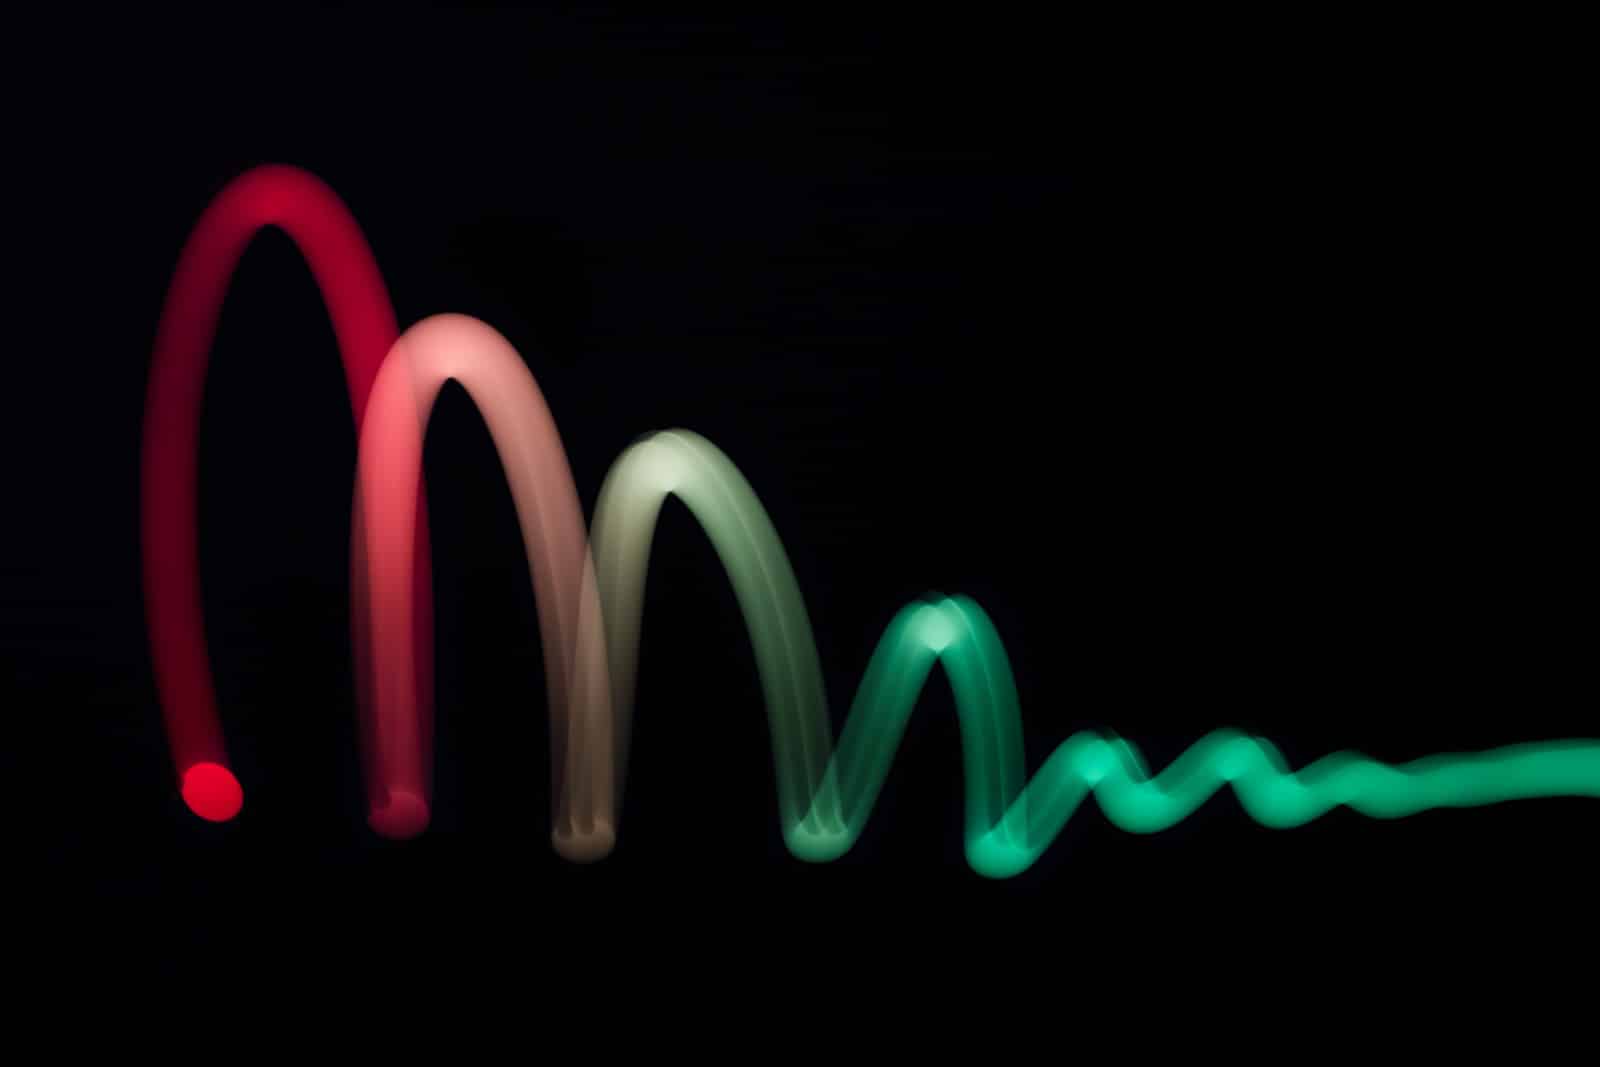 Light Painting: How to Do It and What You’ll Need